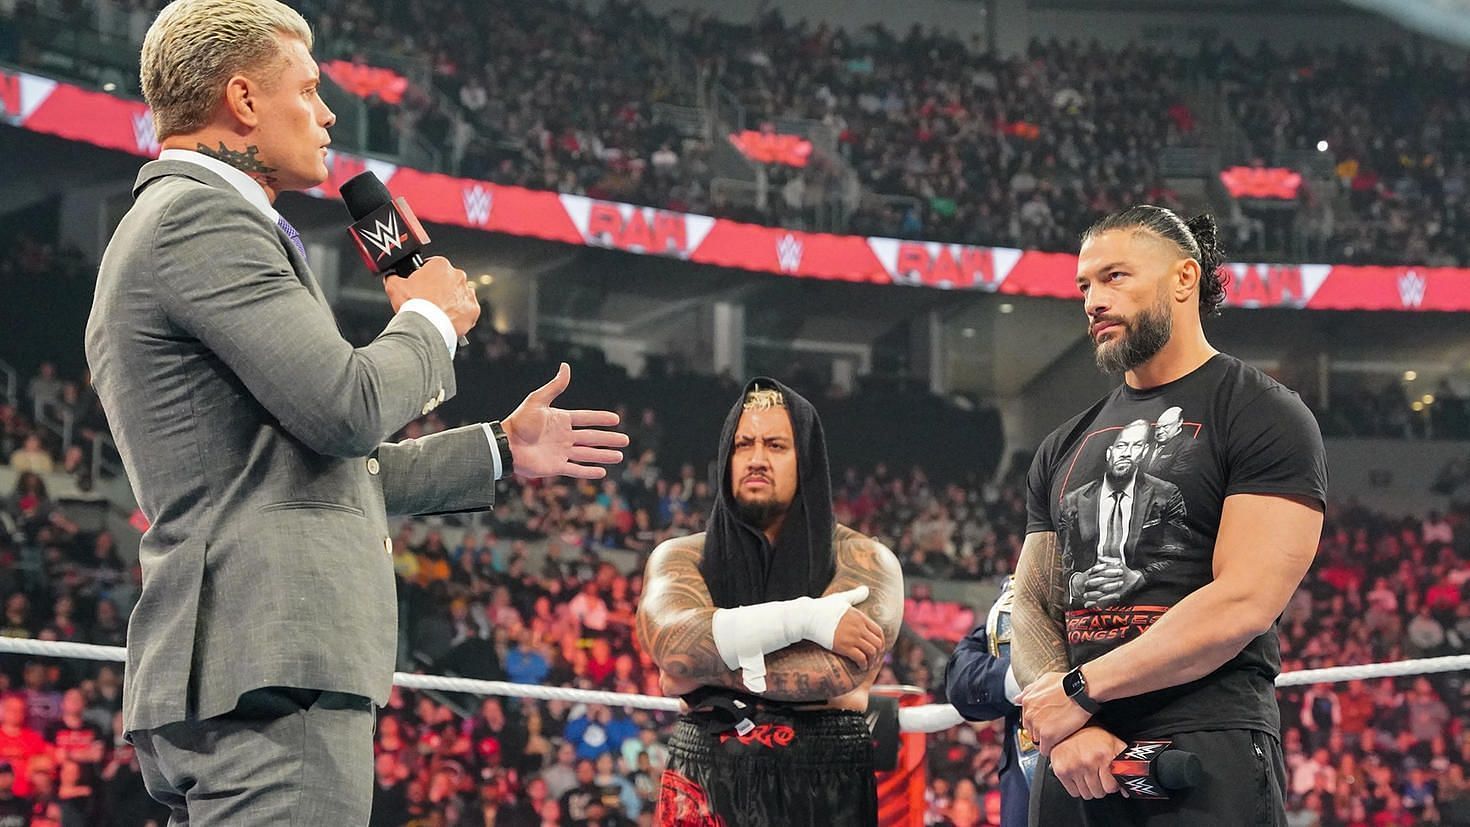 Cody Rhodes and Roman Reigns came face-to-face on RAW this week